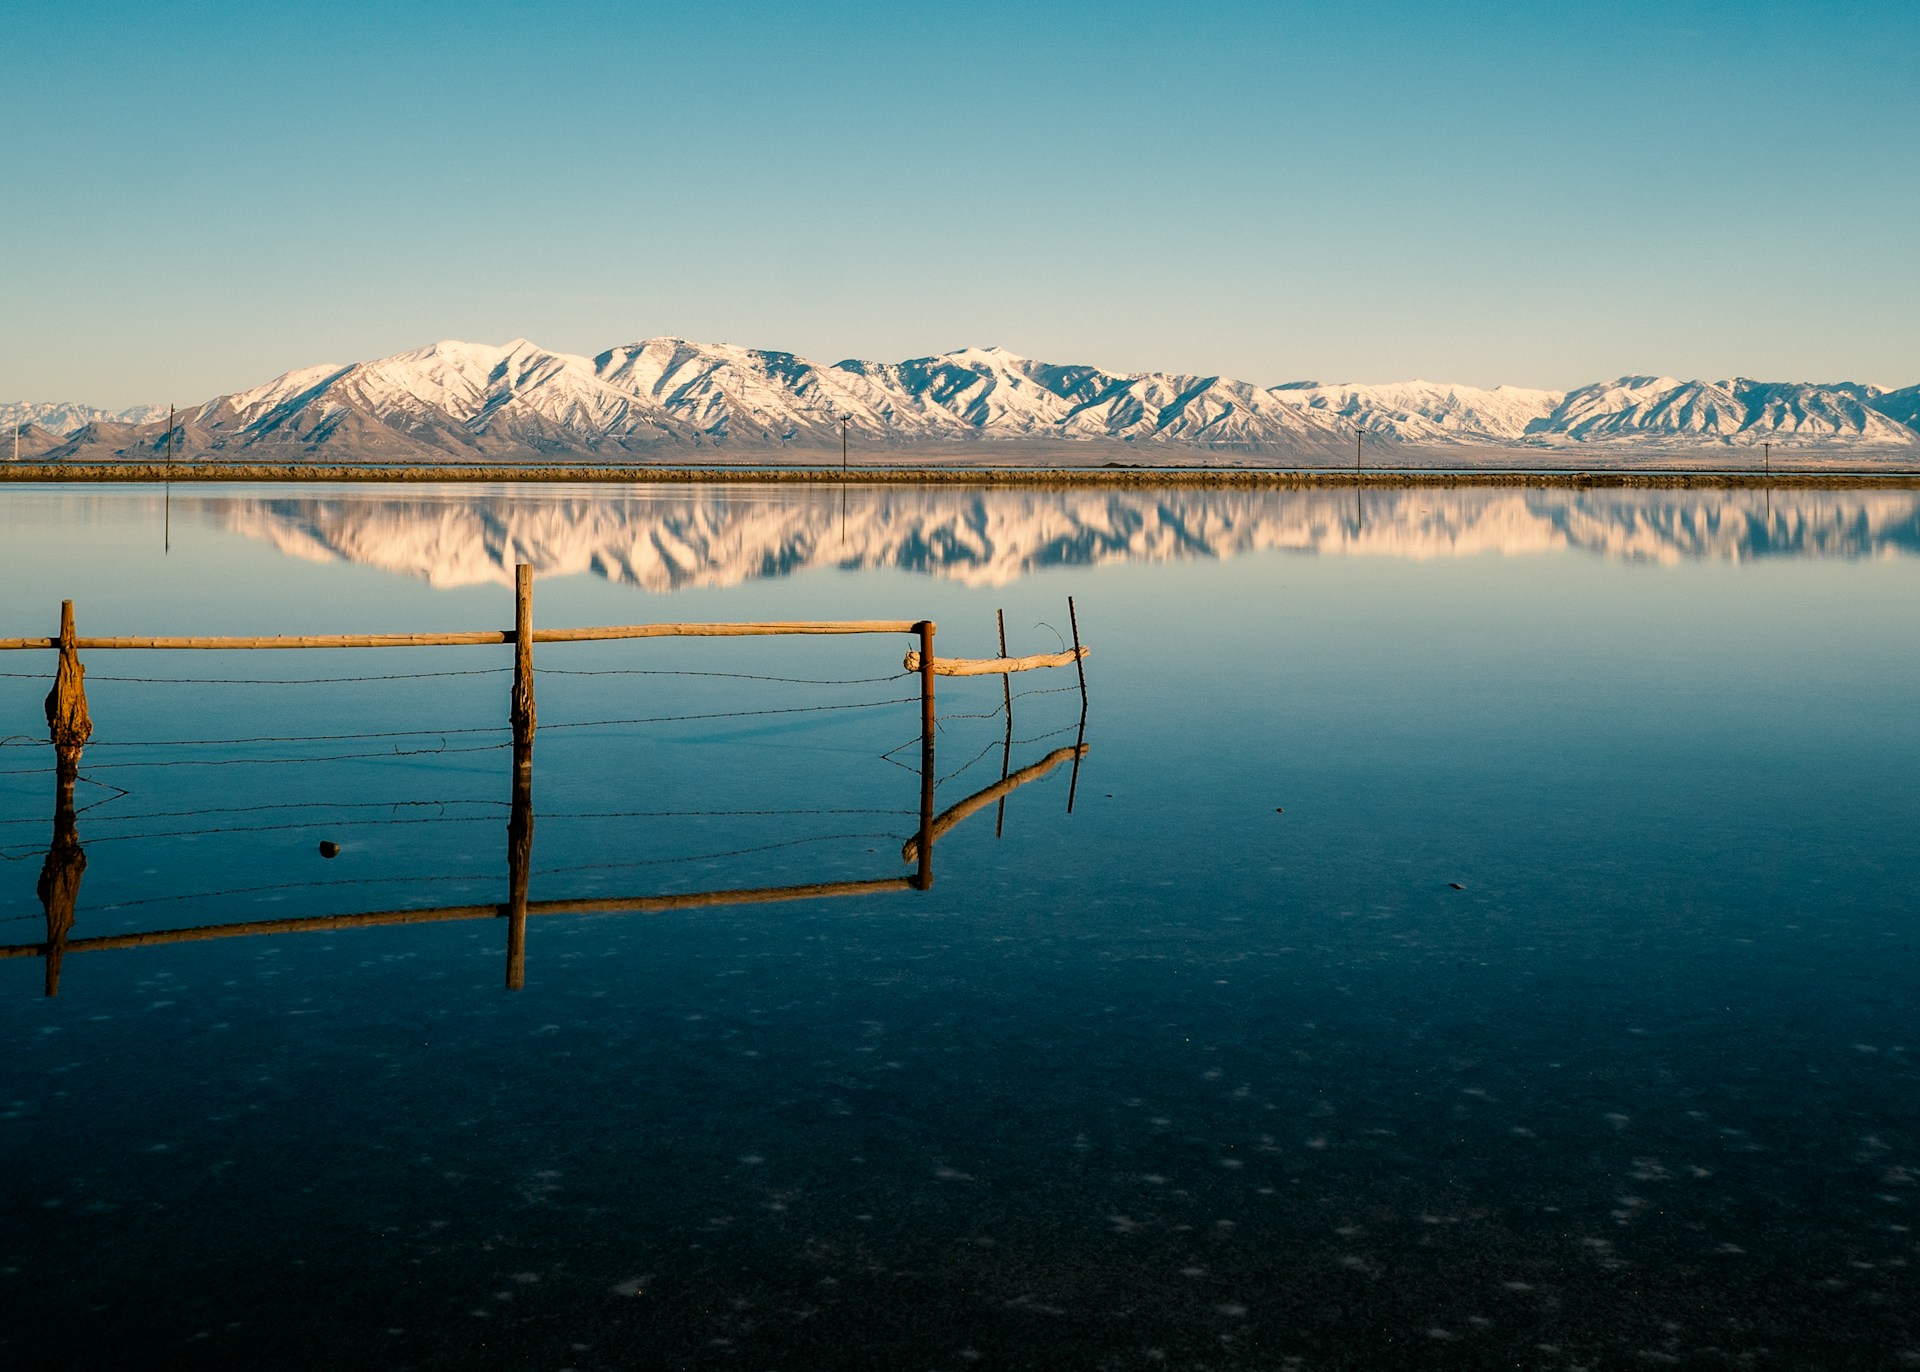 The Great Salt Lake, a great place for camping in Utah
